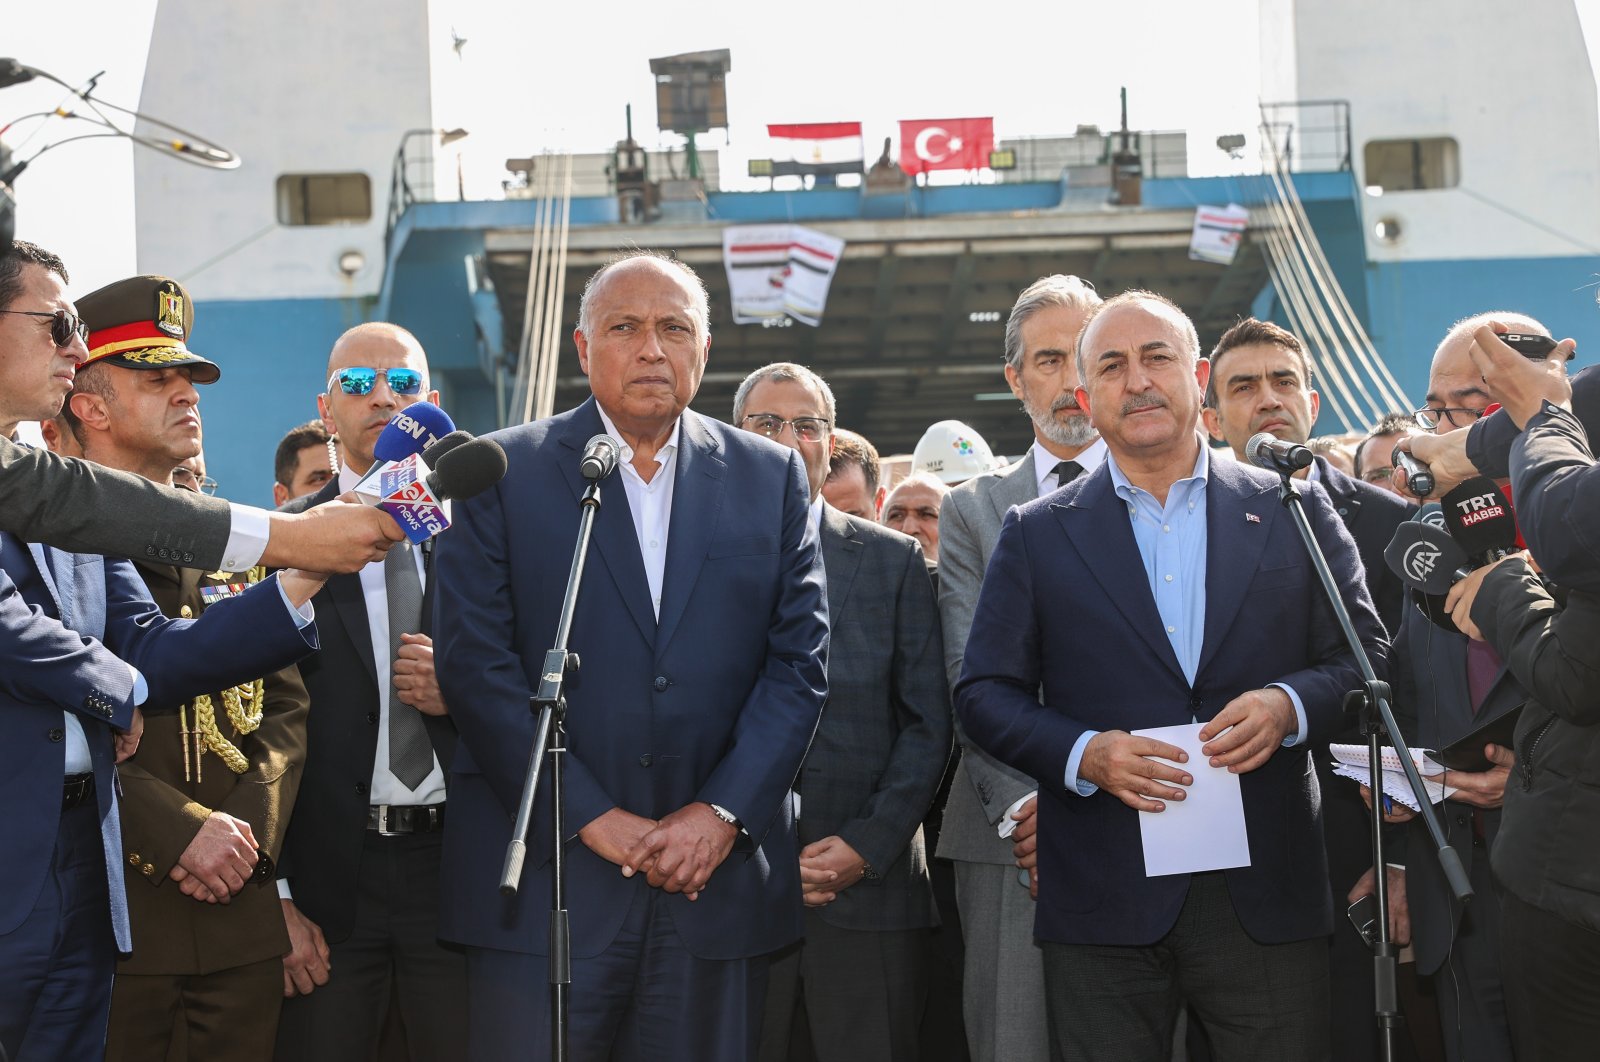 Foreign Minister Mevlüt Çavuşoğlu (R) attends a news conference with Egyptian Foreign Minister Sameh Shoukry (L) in Mersin, southern Türkiye, Feb. 27, 2023. (AA Photo)